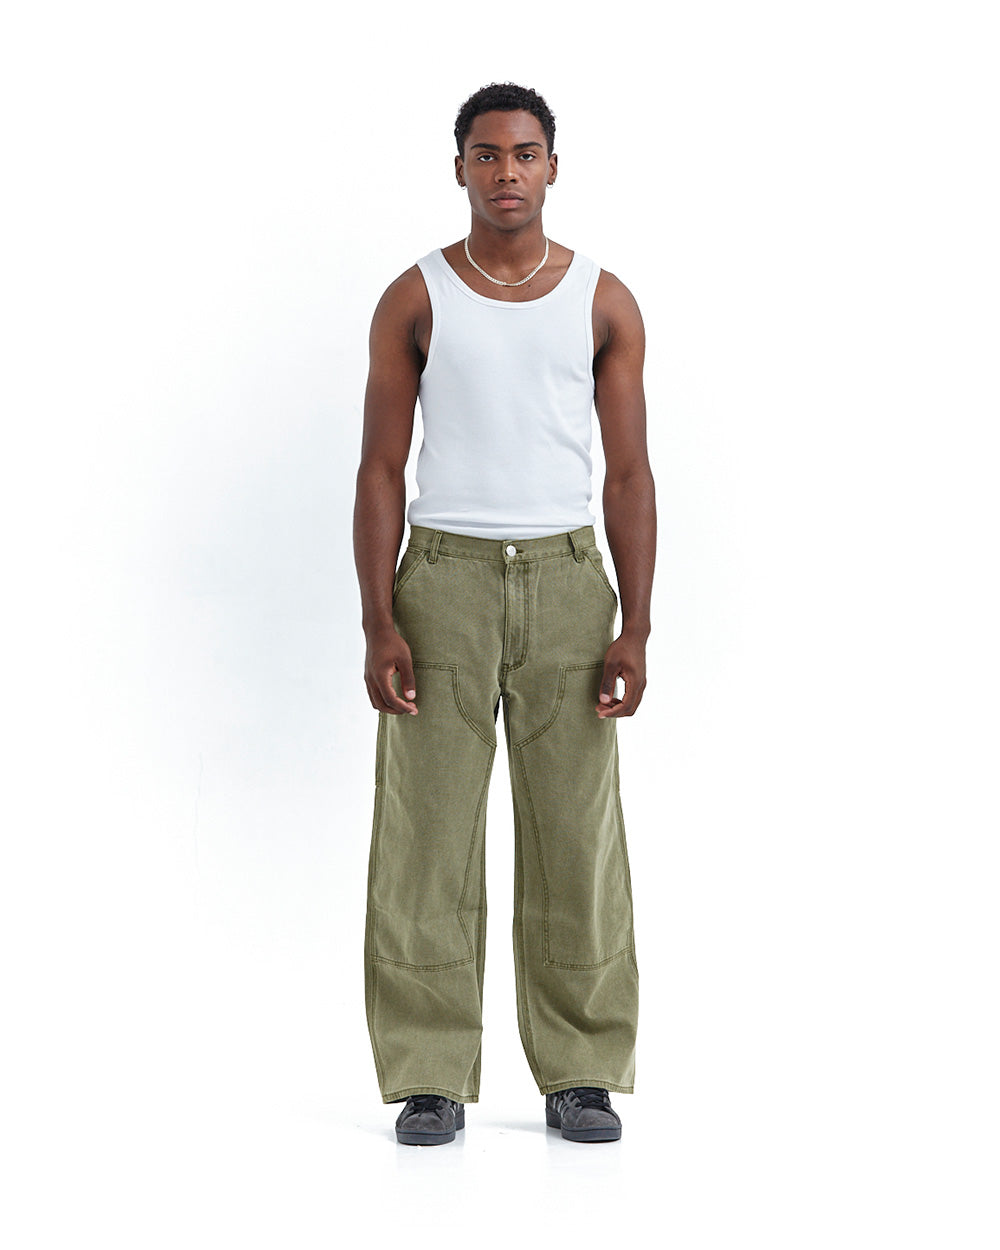 V1 DOUBLE KNEE PANTS STONE-WASHED GREEN